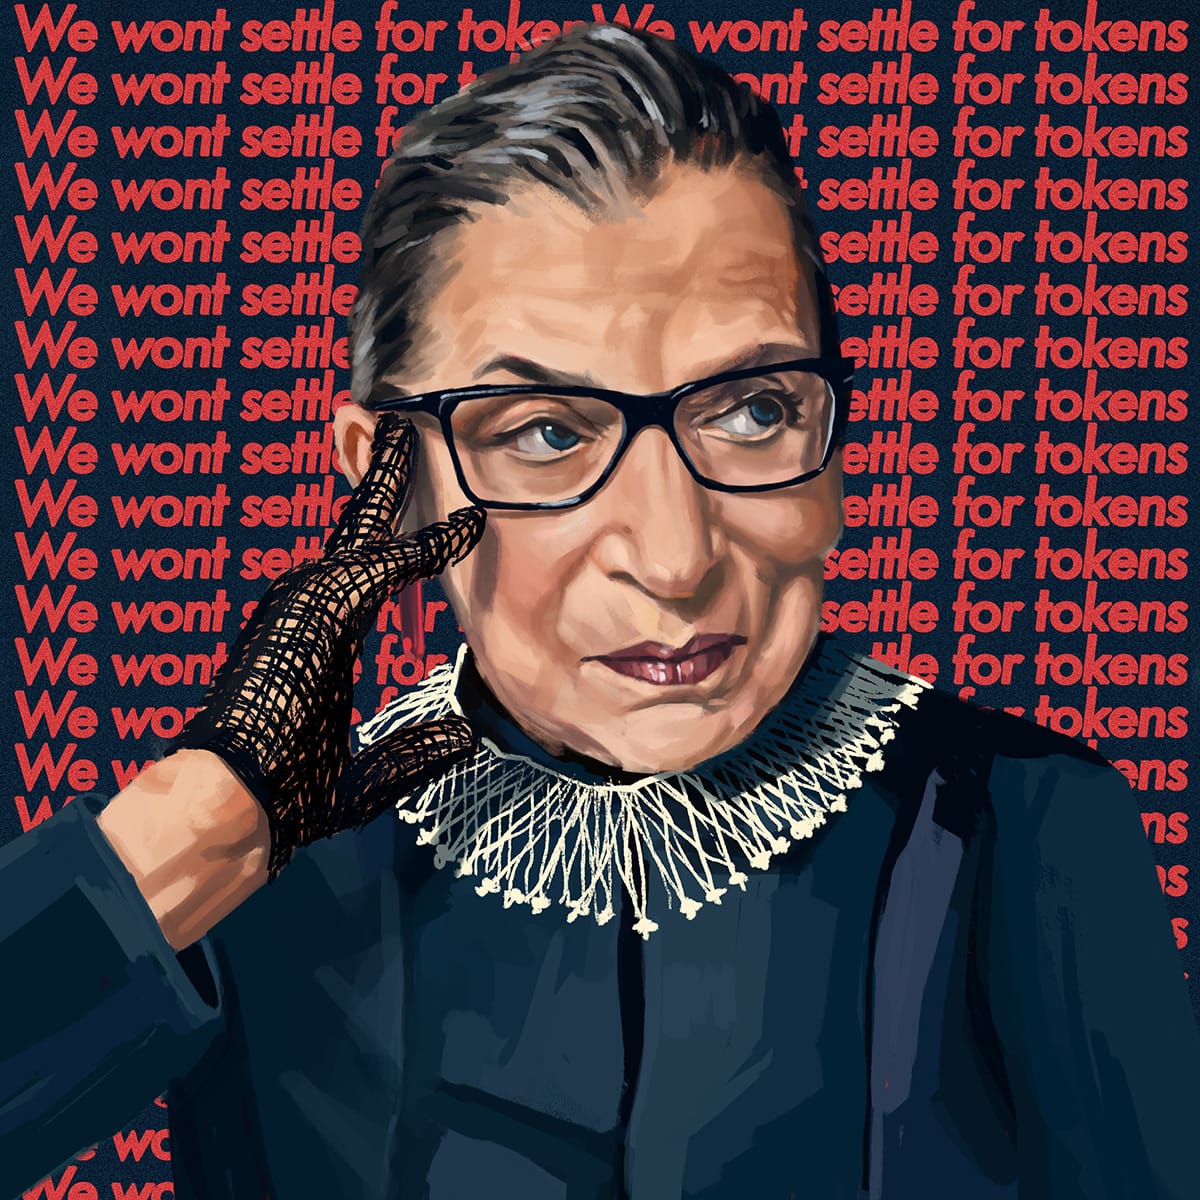 Ruth Bader Ginsburg knew the importance of studying the competition, knowing her audience, and using the law to build air-tight strategies to advance who “we the people” stands for. Had we followed her foundationally sound approach in Roe v. Wade, reproductive rights wouldn’t be vulnerable to reversal today.